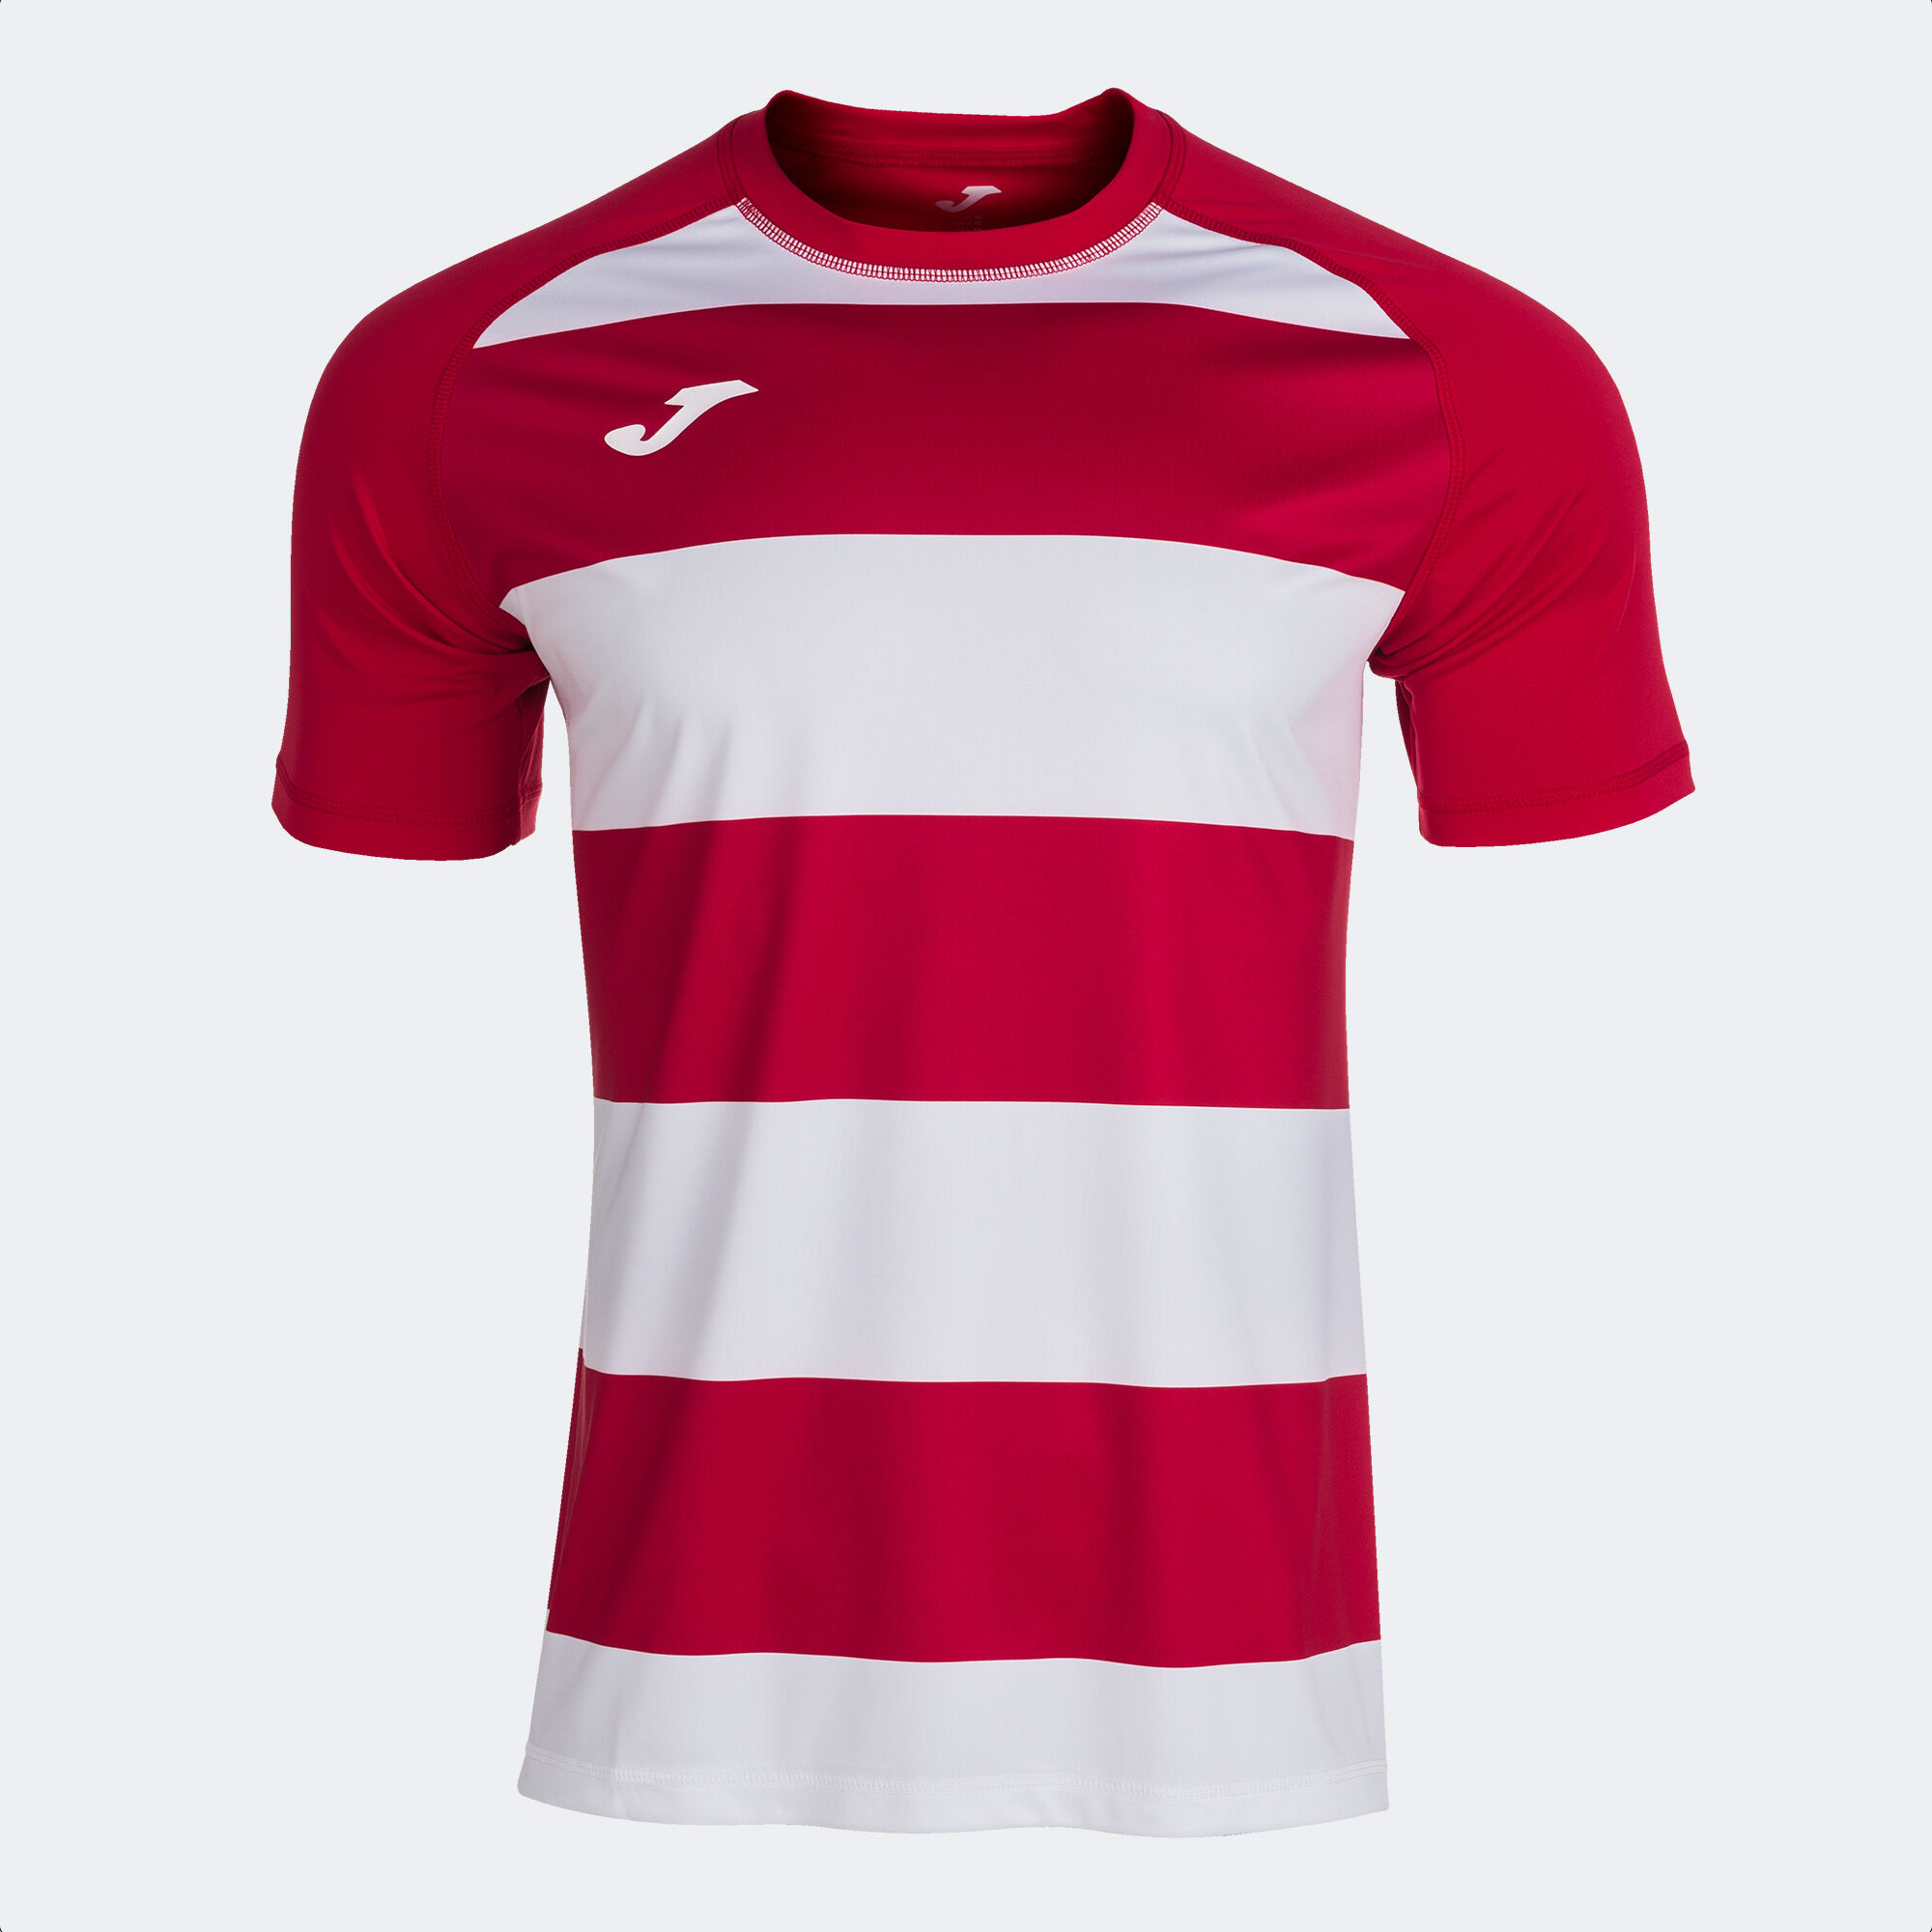 Shirt short sleeve man Prorugby II red white